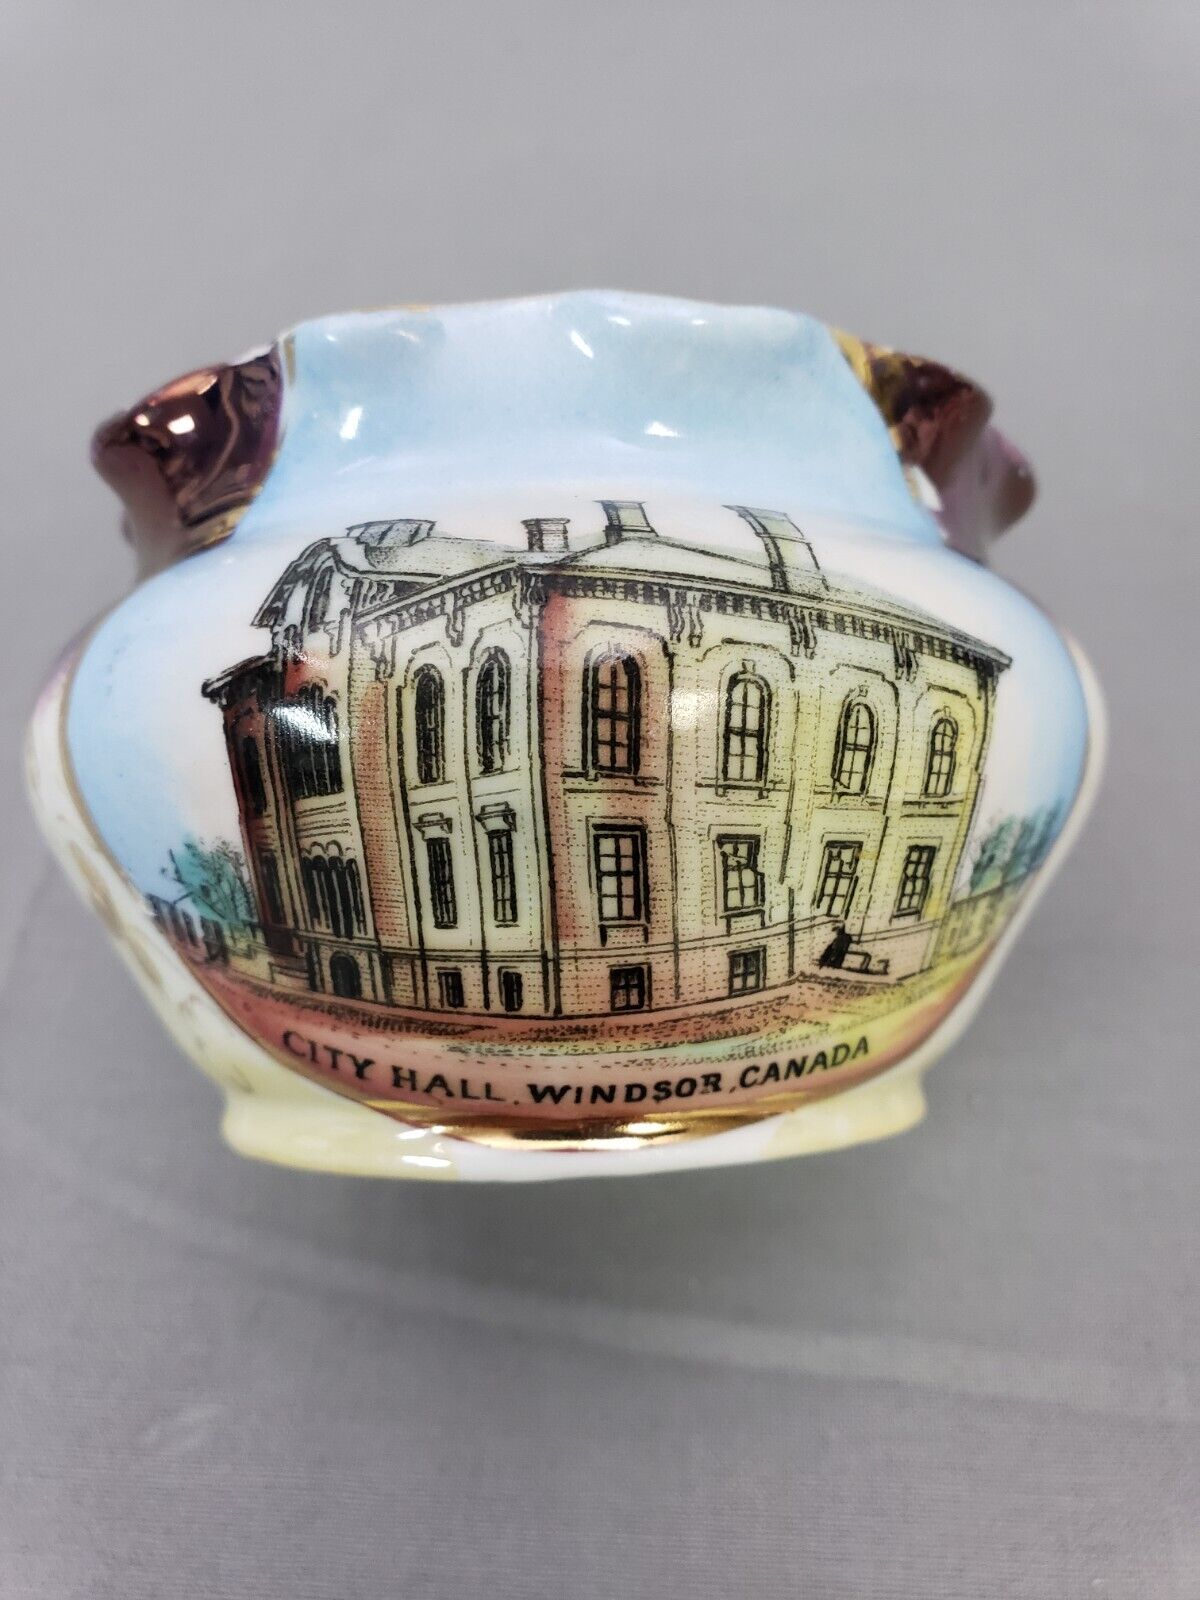 Ladies Spittoon or Cuspidor Porcelain City Hall Windsor Canada Made in Germany